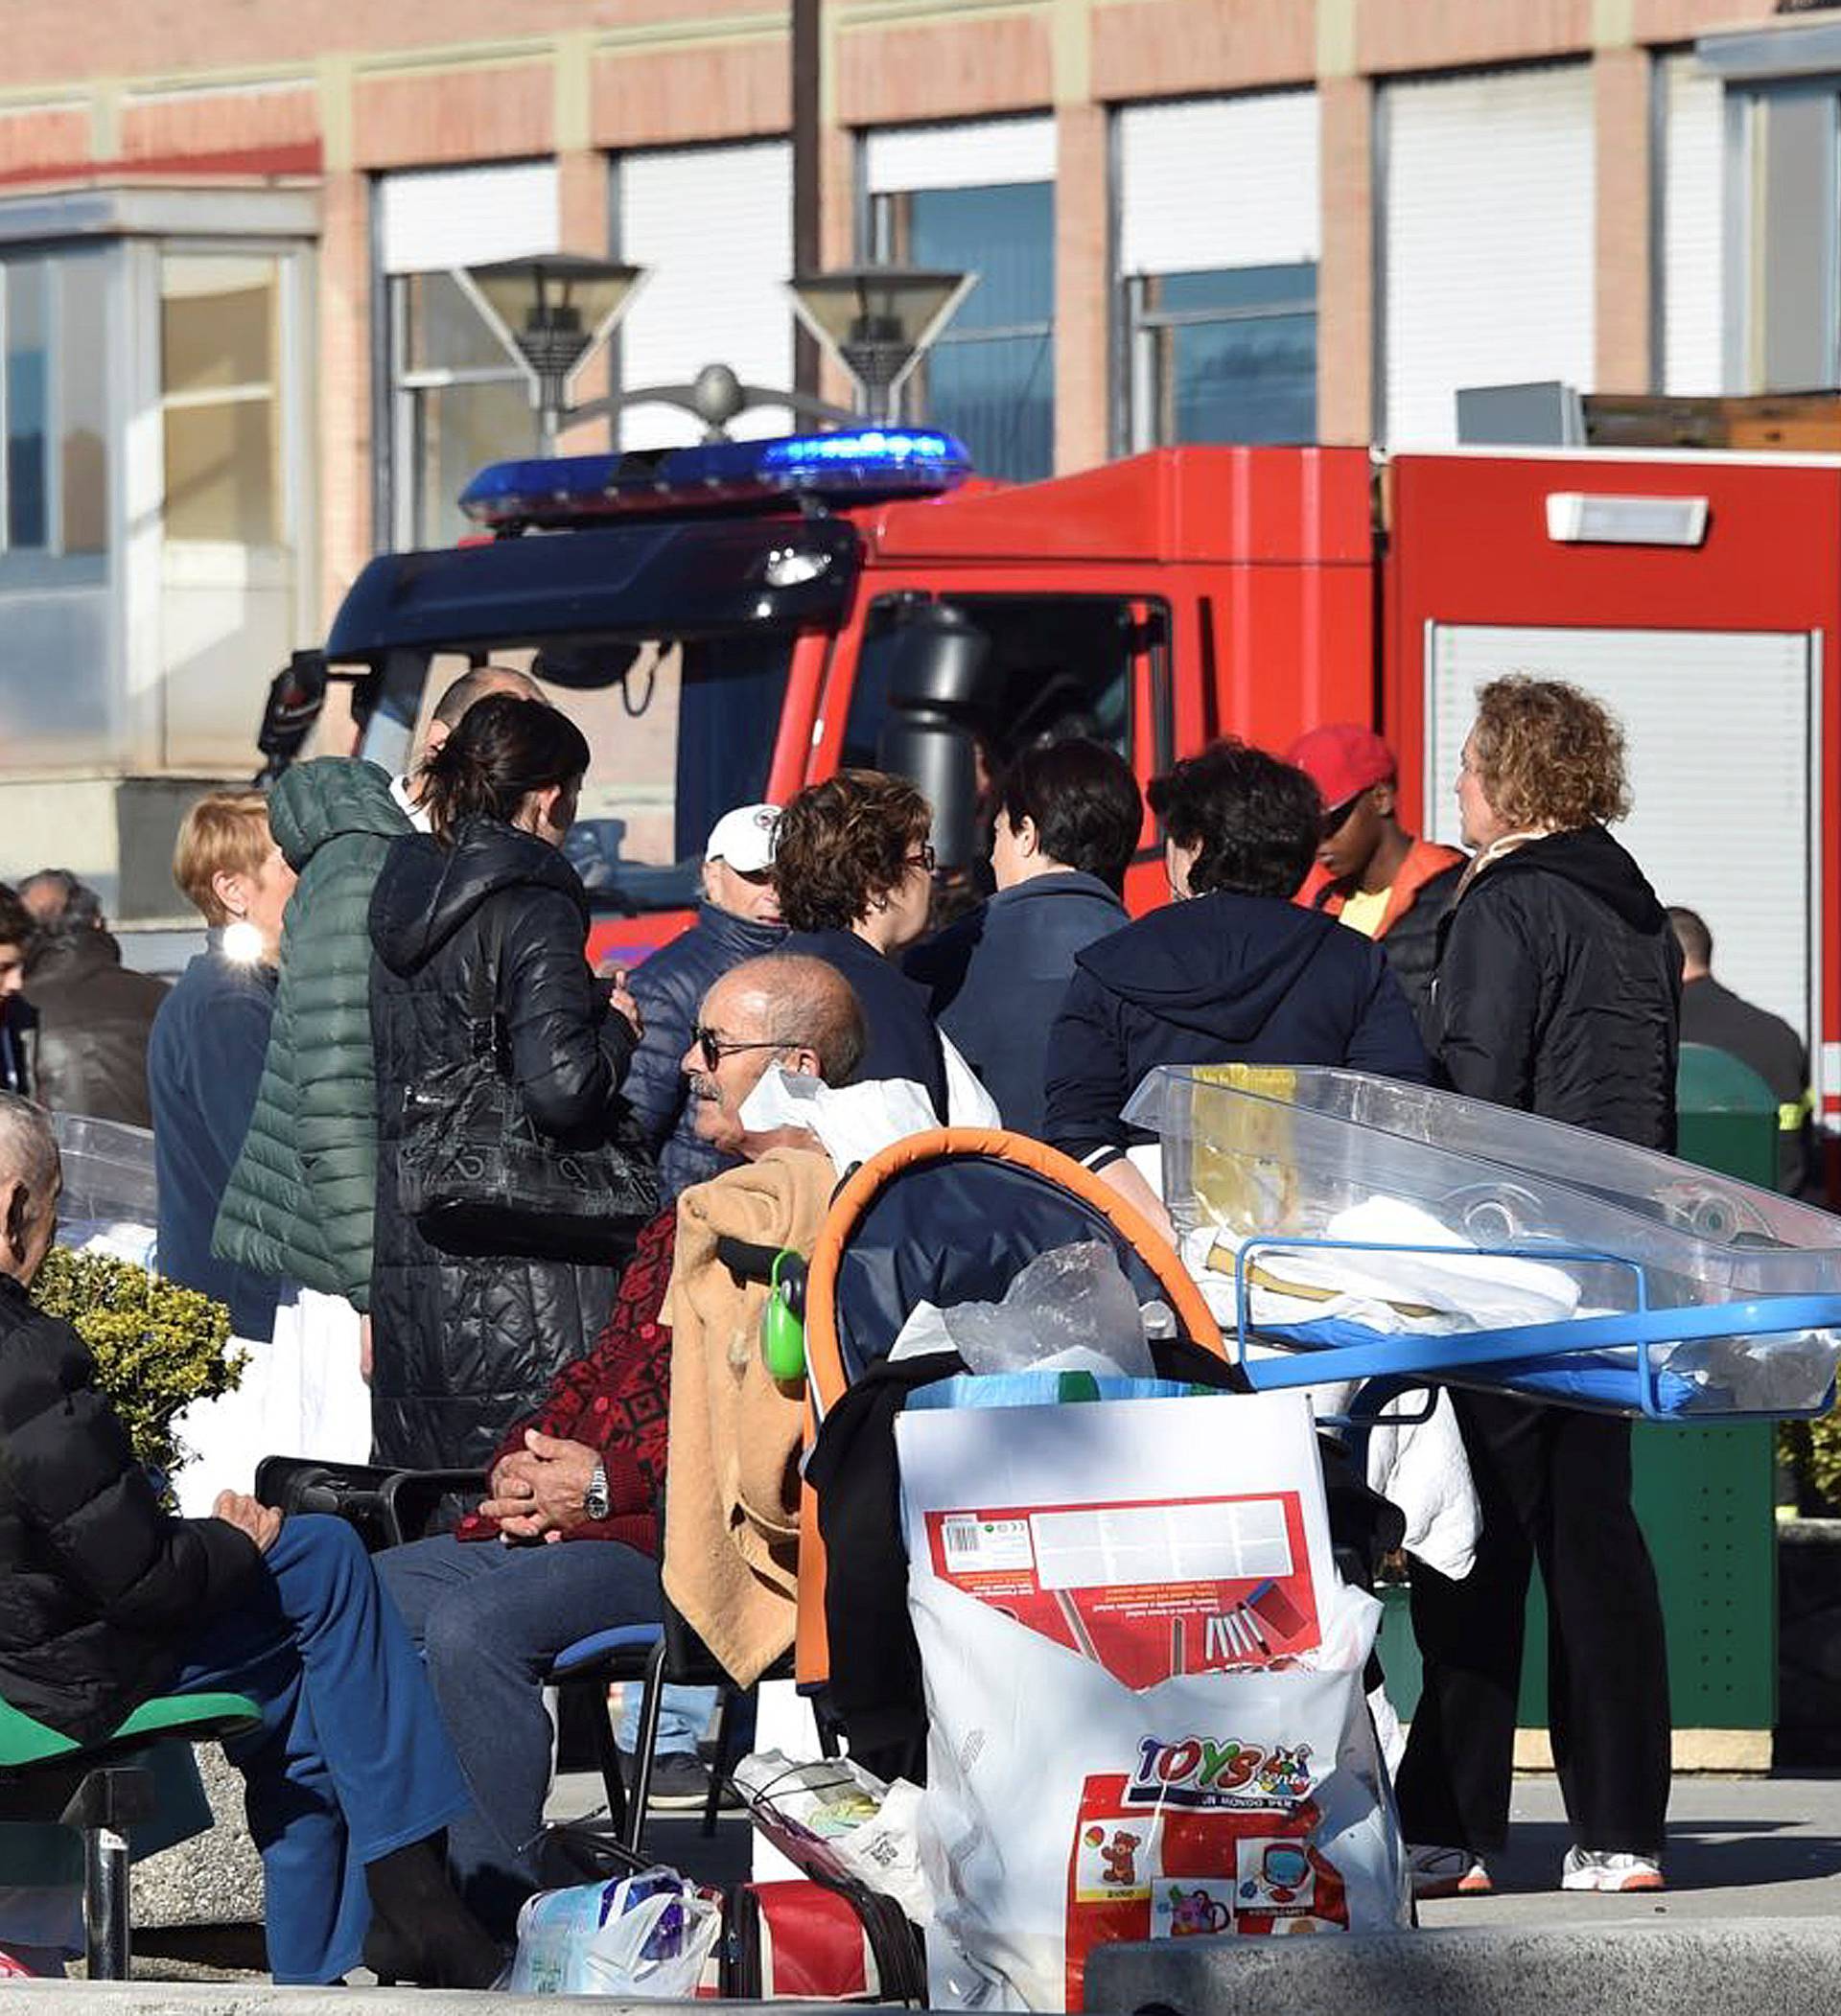 People are evacuated from an hospital following an earthquake in Rieti